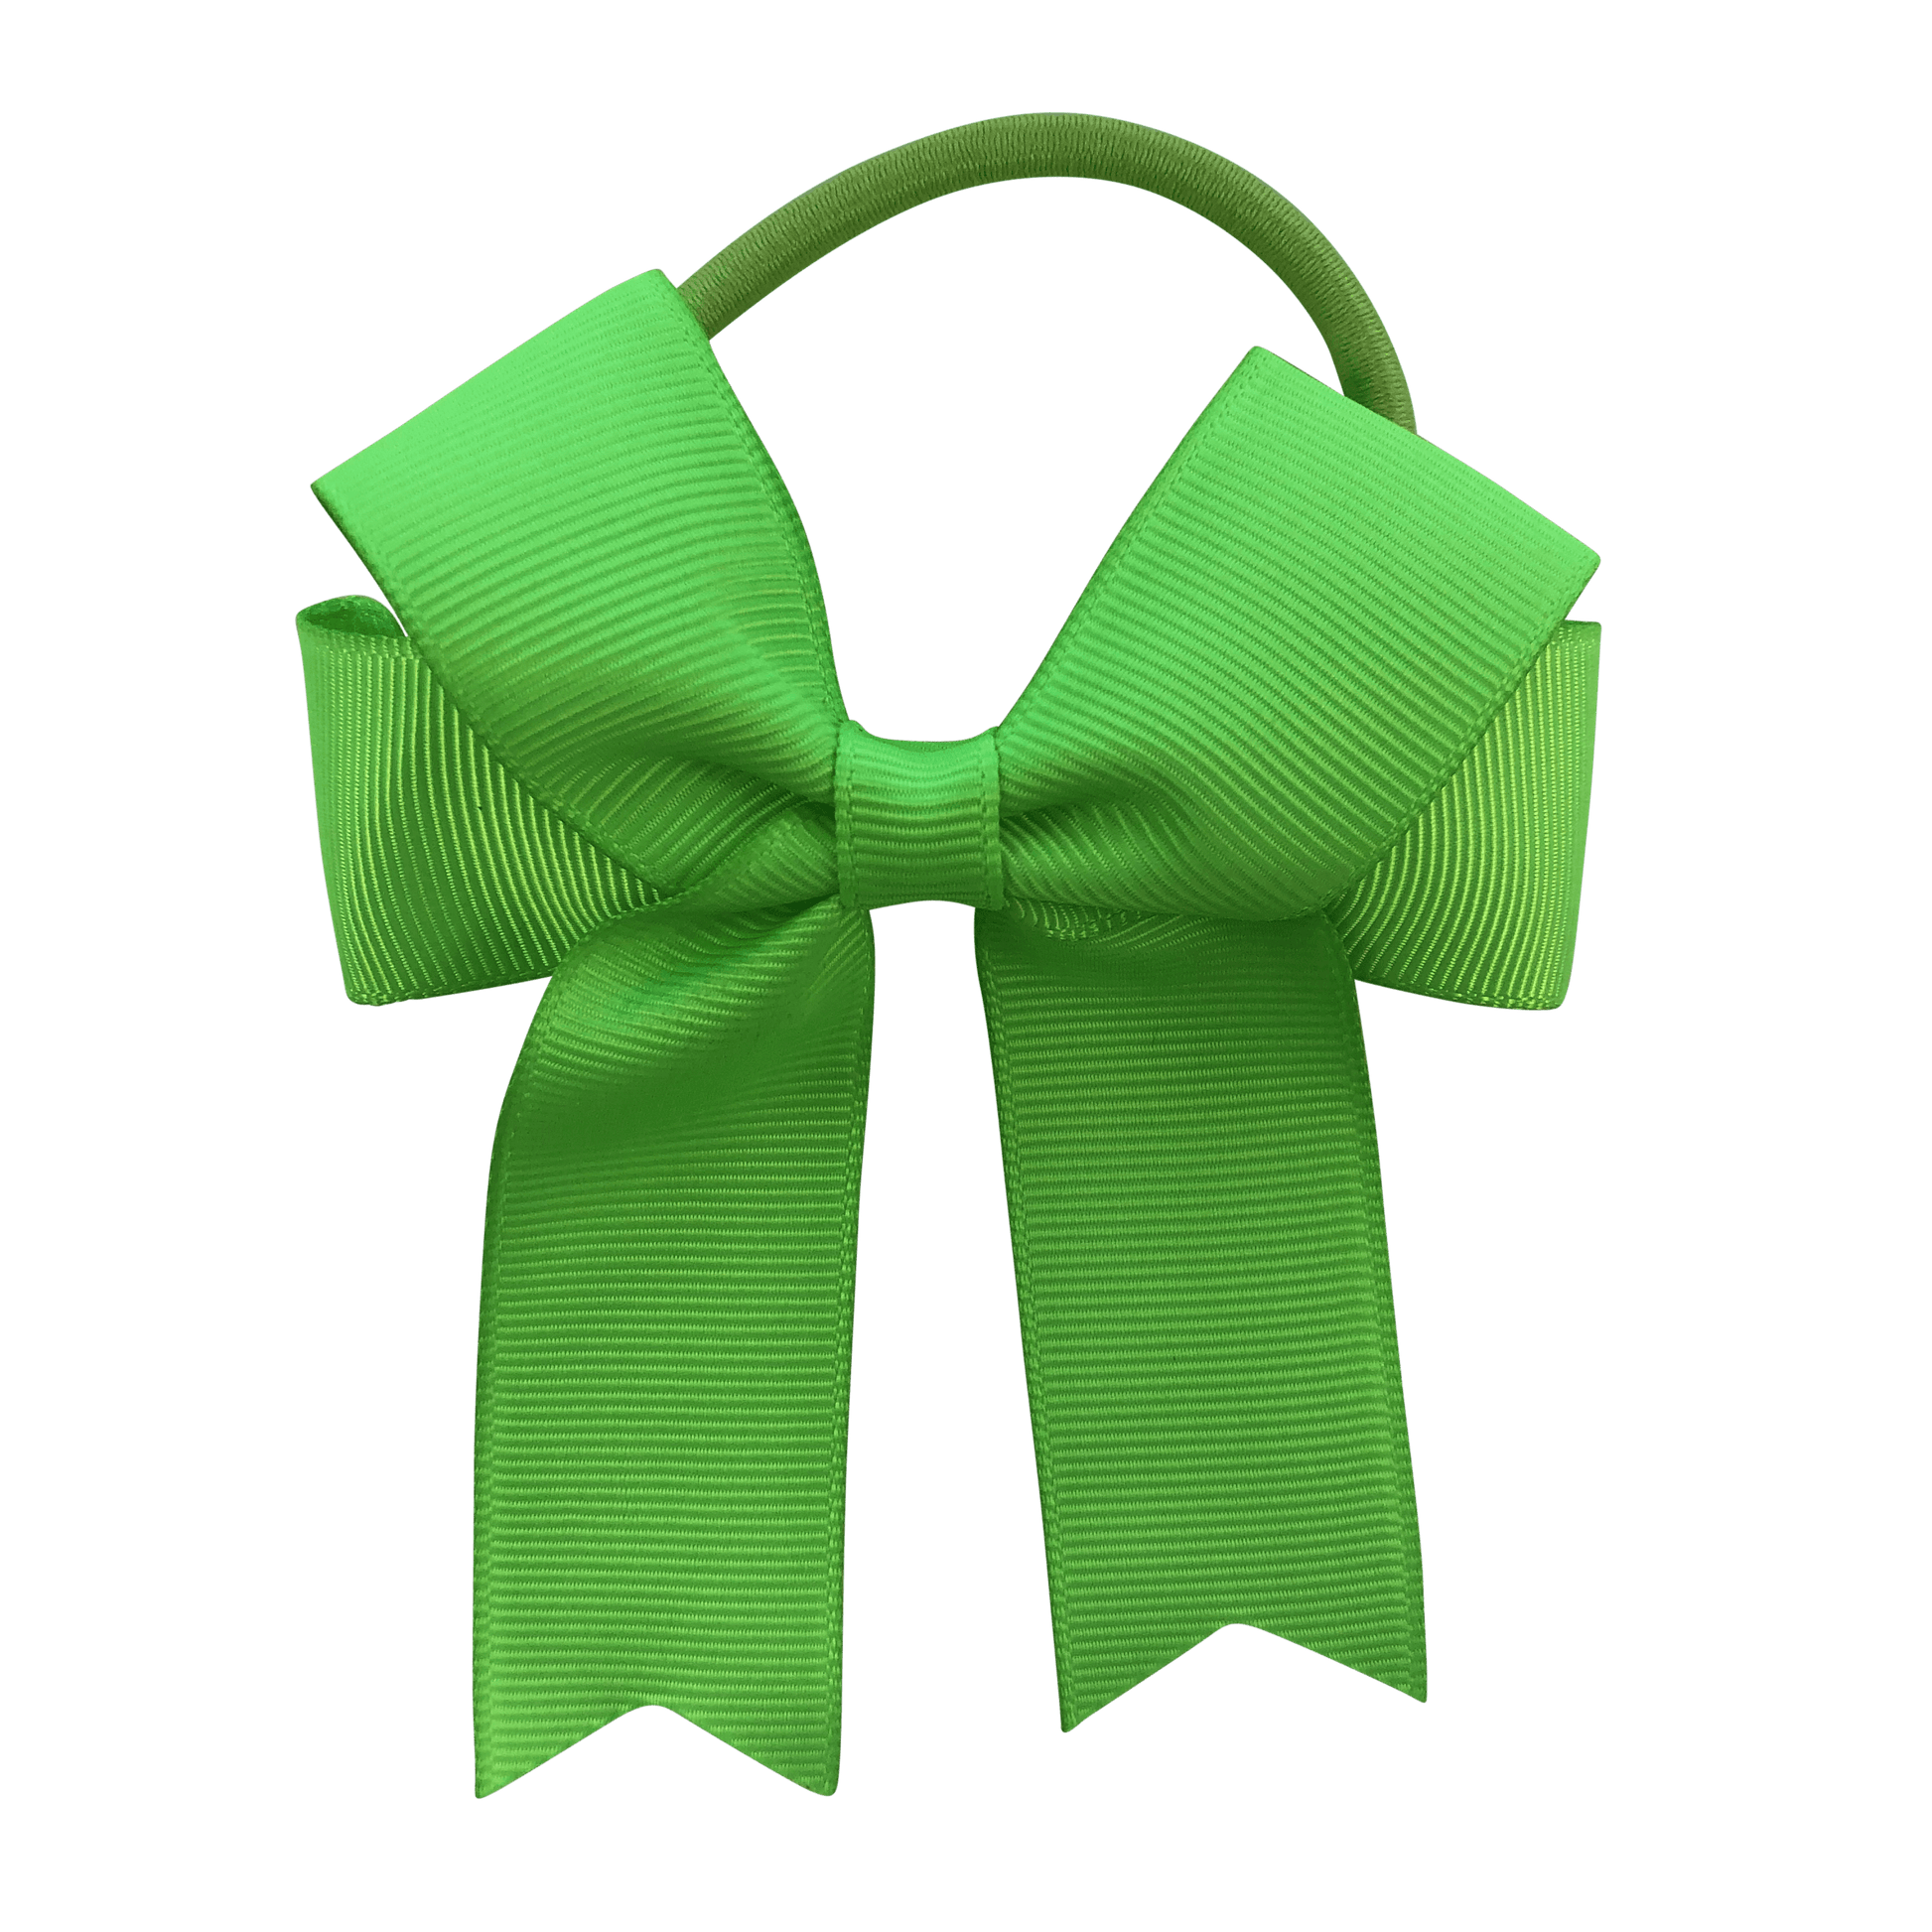 Fluoro Green Hair Accessories - Assorted Hair Accessories - School Uniform Hair Accessories - Ponytails and Fairytales